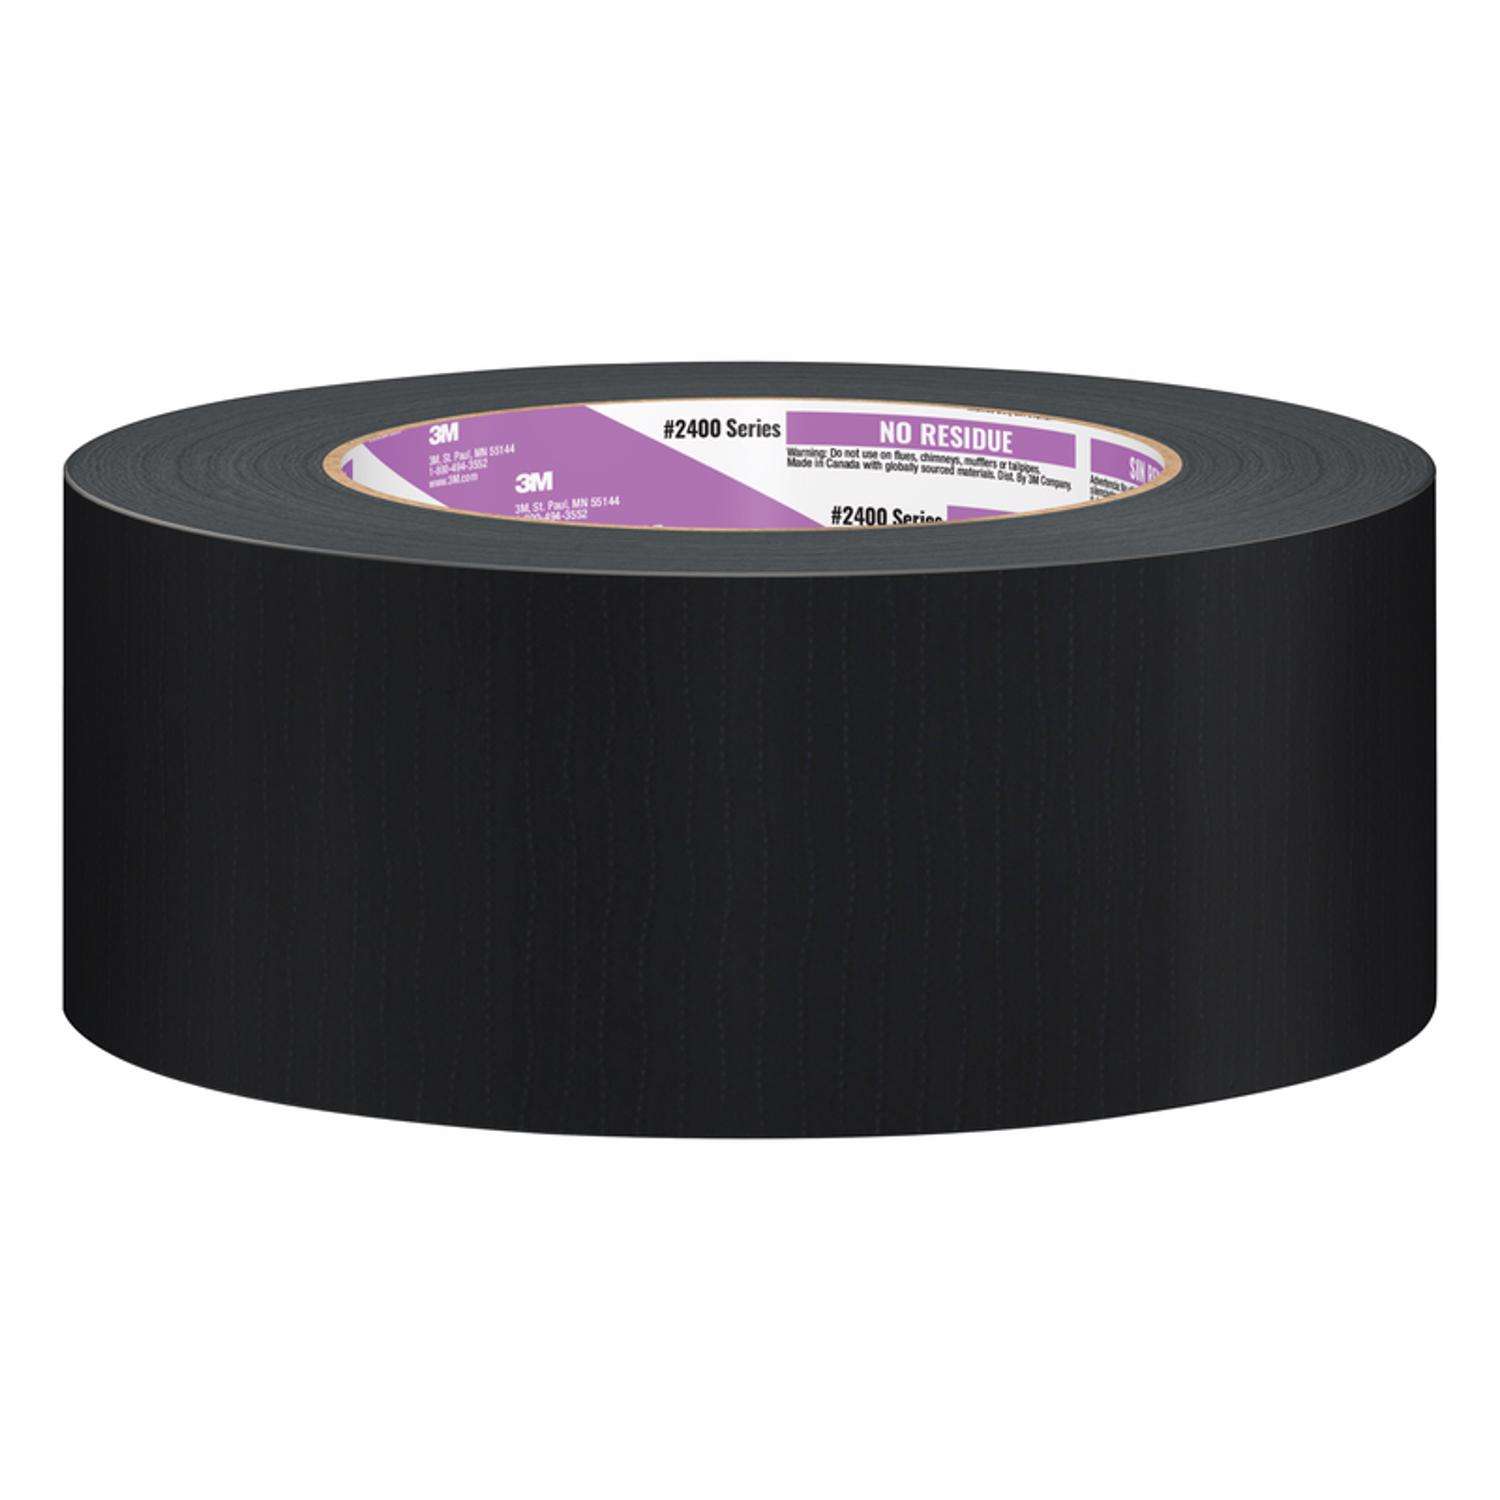 1roll/3M Waterproof Tape,Daily Clear Self-adhesive Sink Pool Seam Tape,Used  For Kitchen